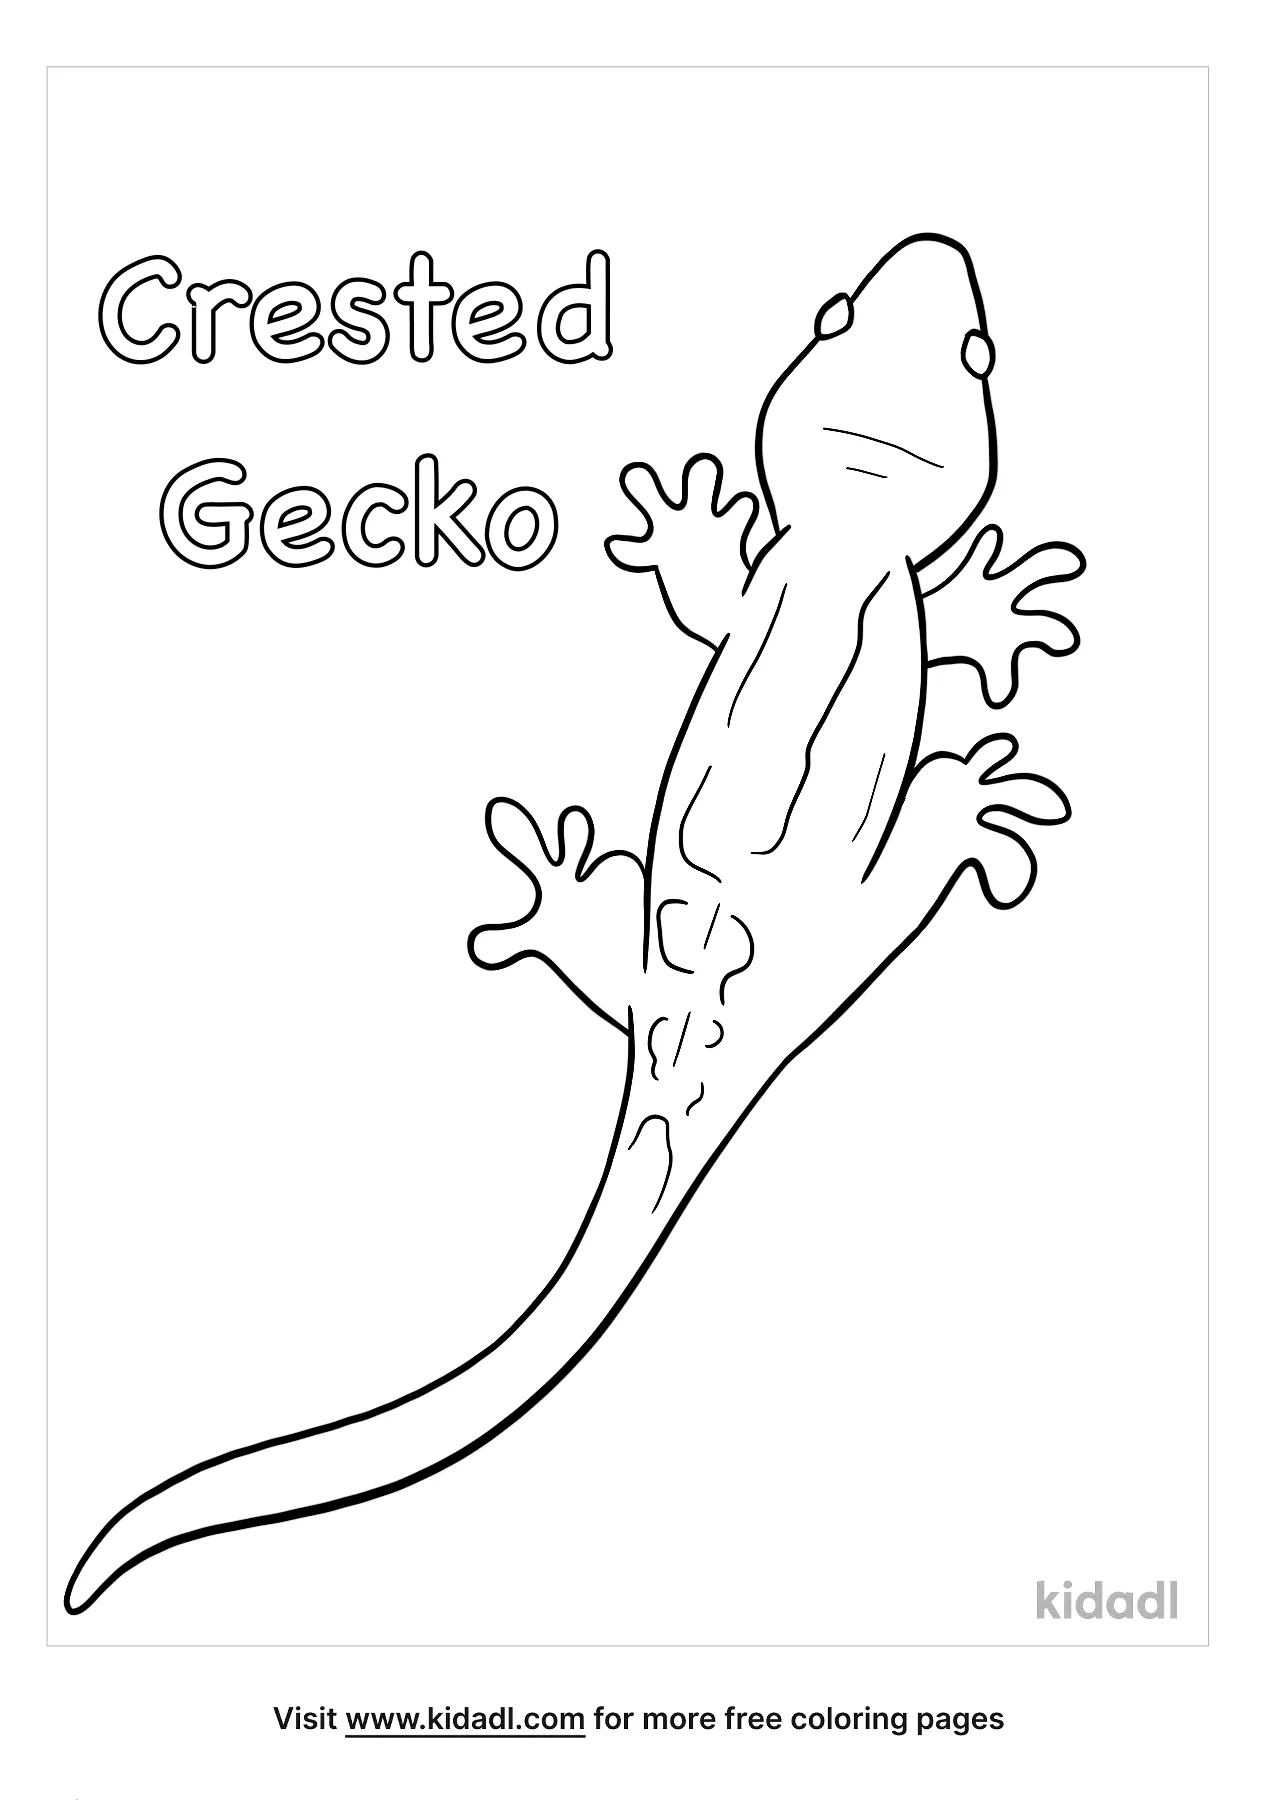 crested gecko coloring pages